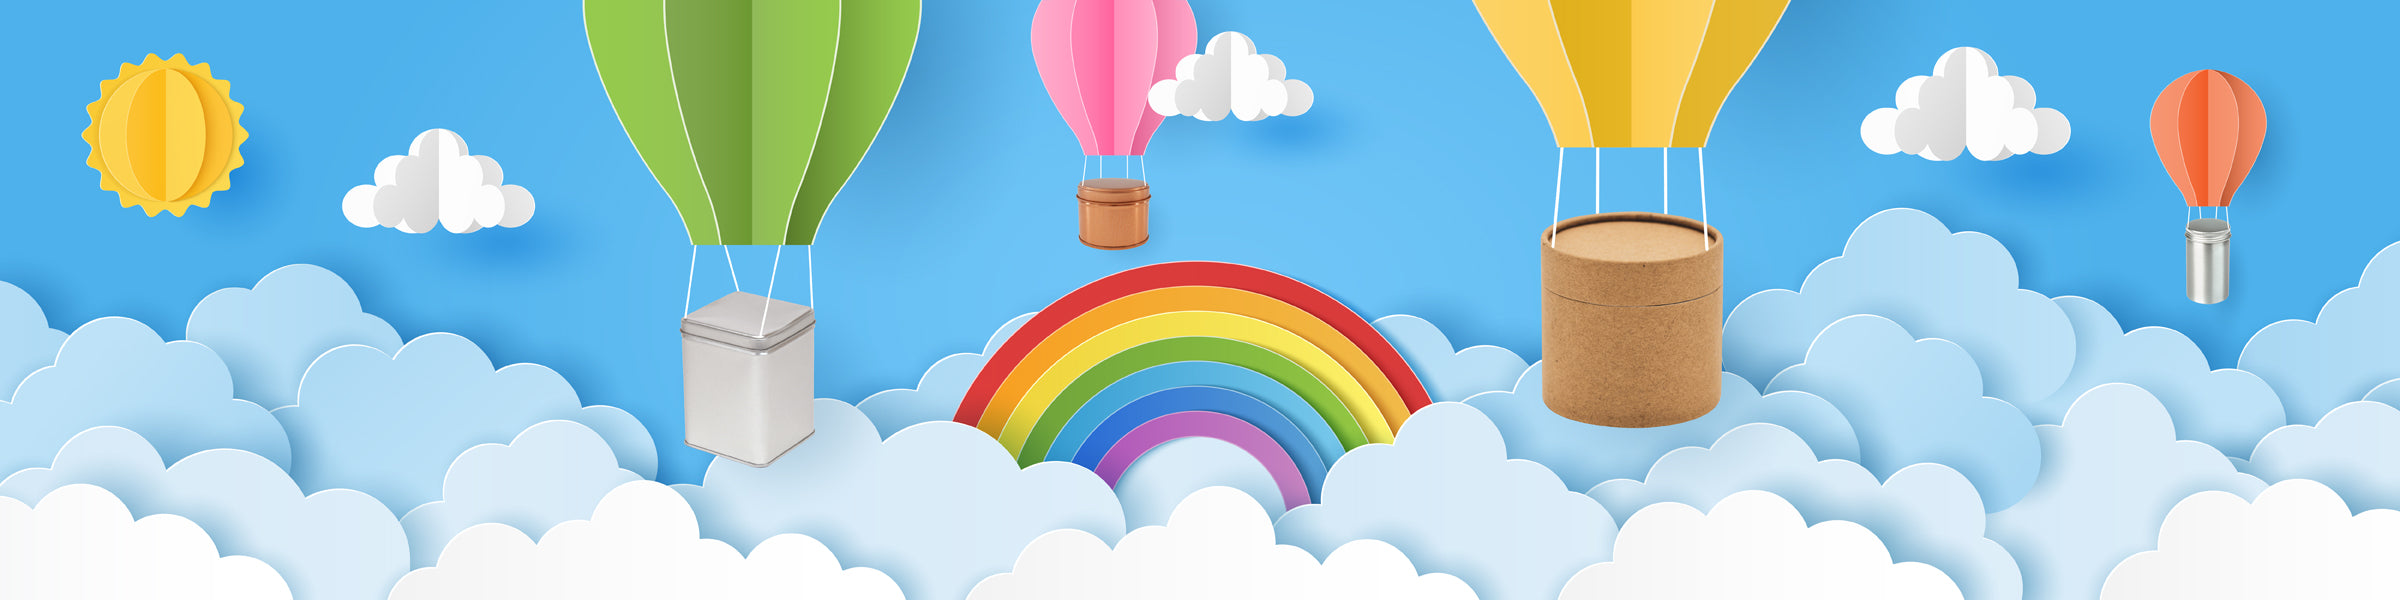 Metal and cardboard packaging being delivered floating down on parachute with a blue sky and rainbow backdrop. 